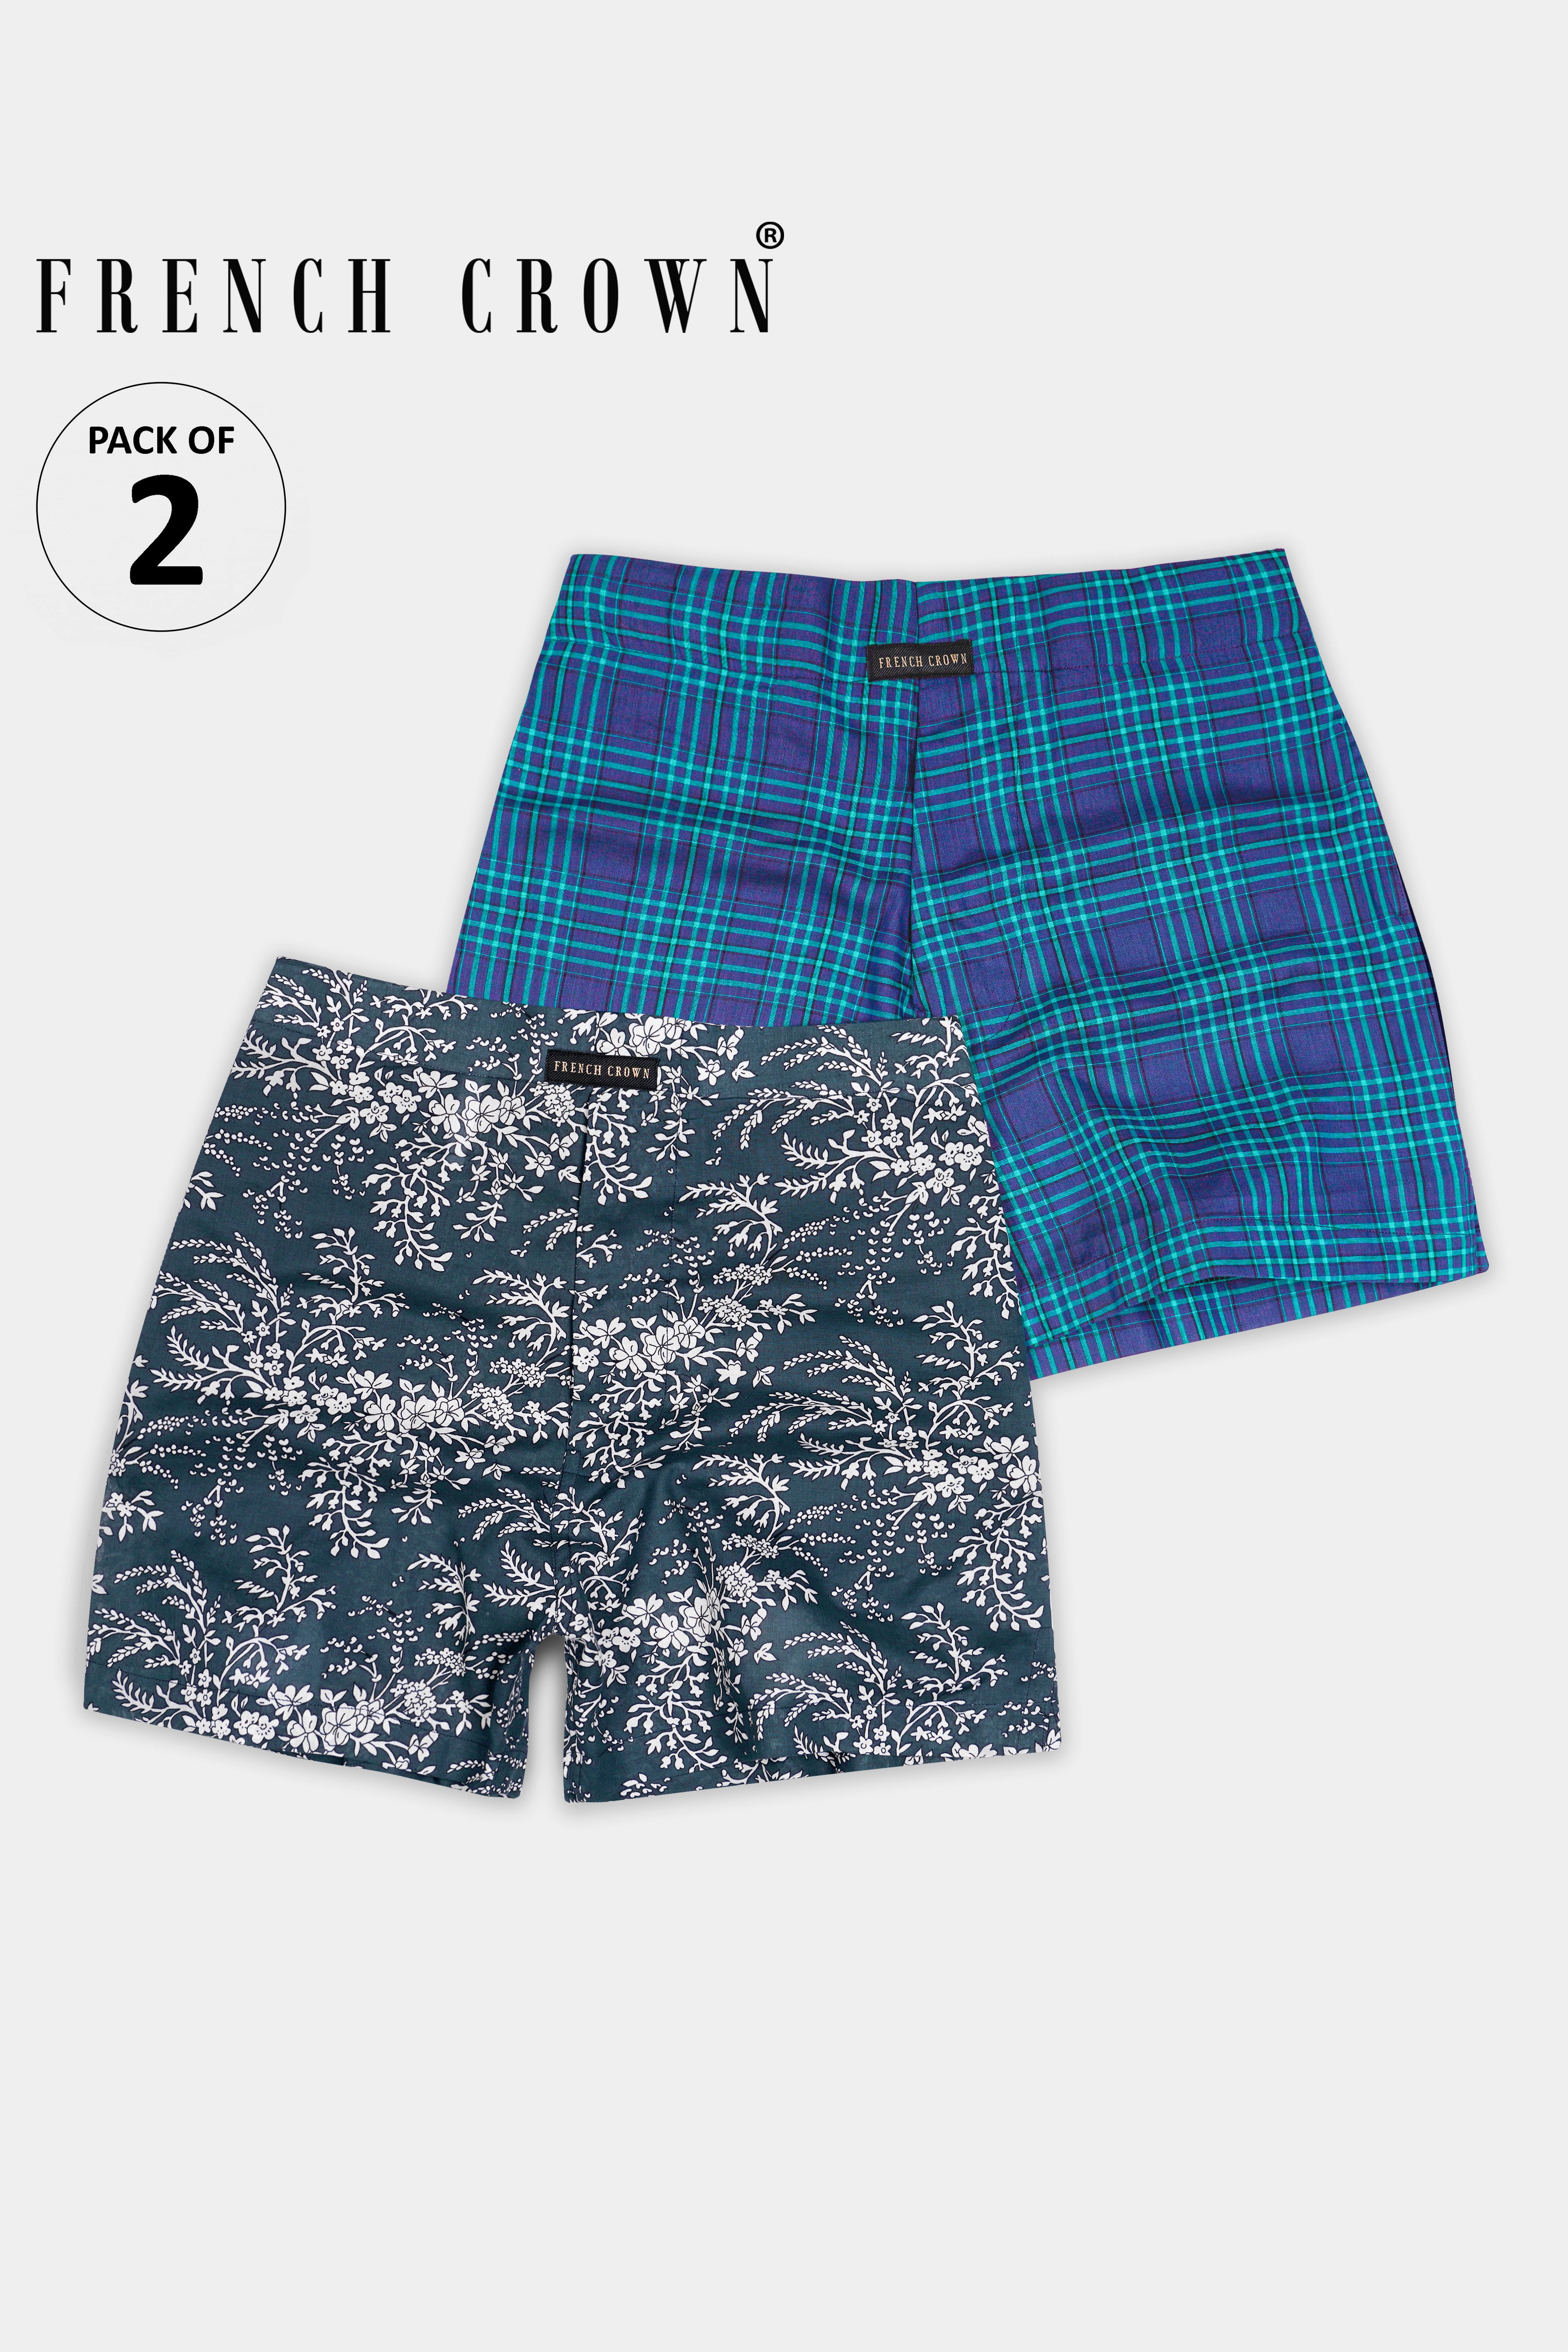 Meteorite Blue with Surfie Green Plaid and Limed Spruce Blue Ditsy Printed Premium Cotton Boxers